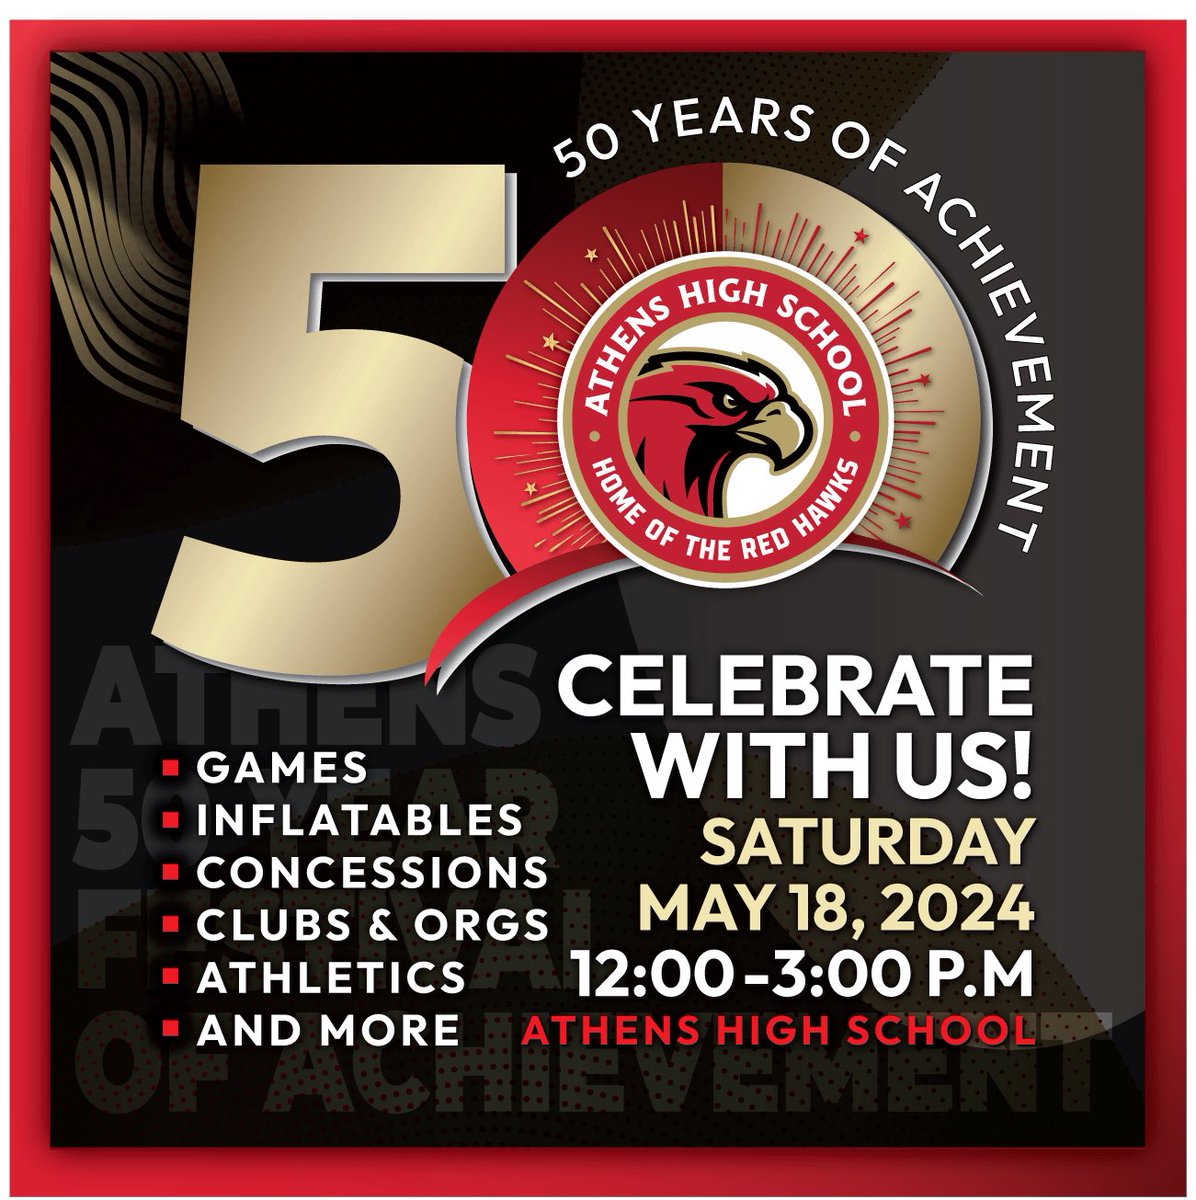 Don’t forget Red Hawks, come out and celebrate 50 years of Athens High School. #Athens50 #AllHawksSoar #OneTroy